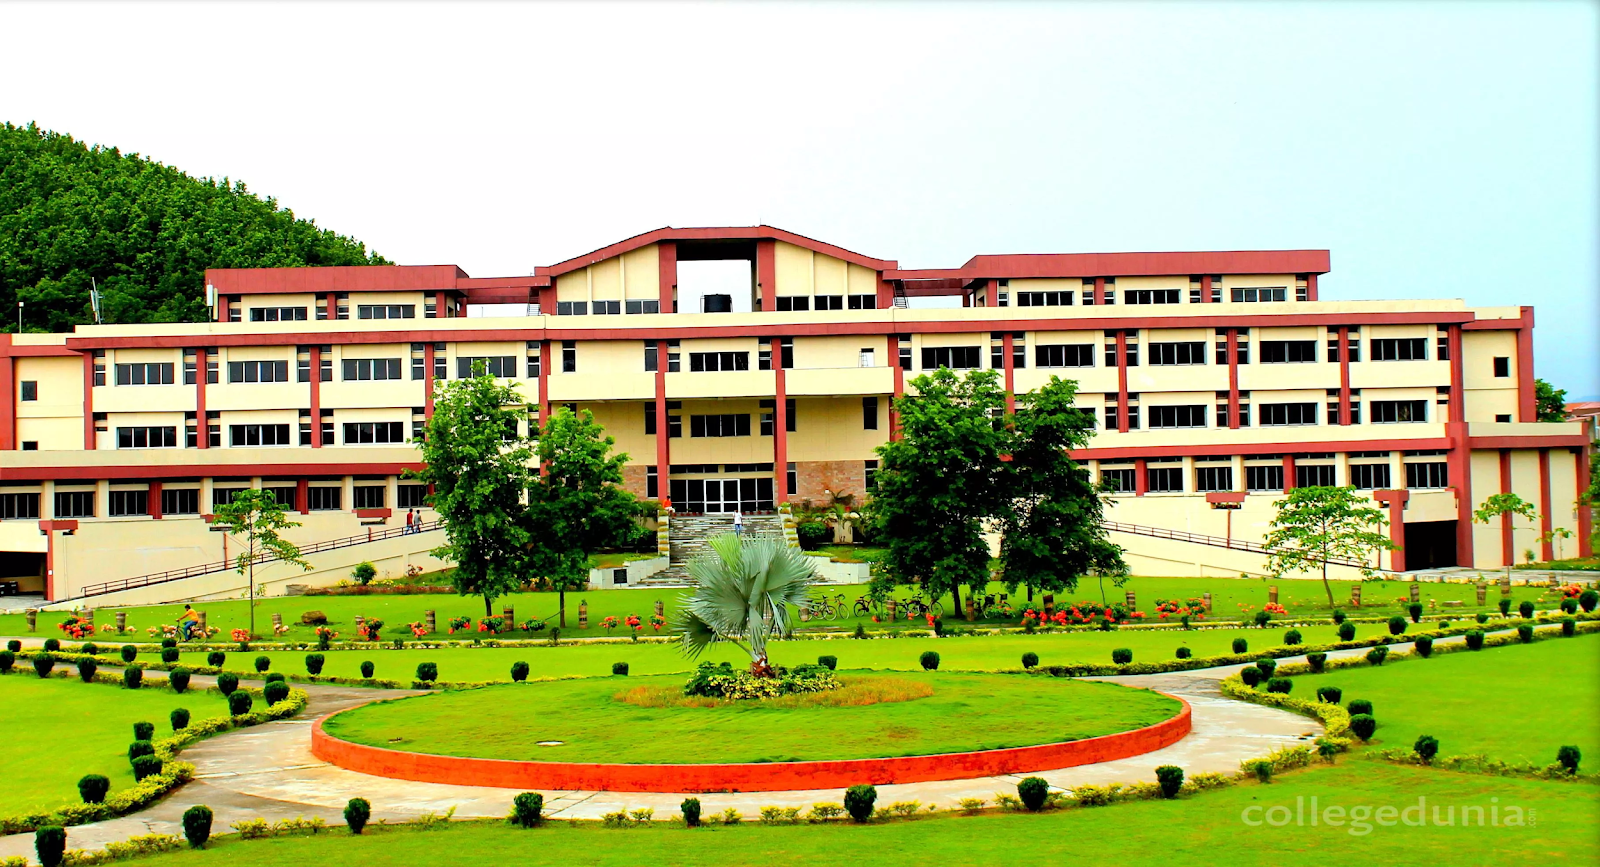 Top 10 Engineering Colleges In India Placement Wise And Ranking 2020